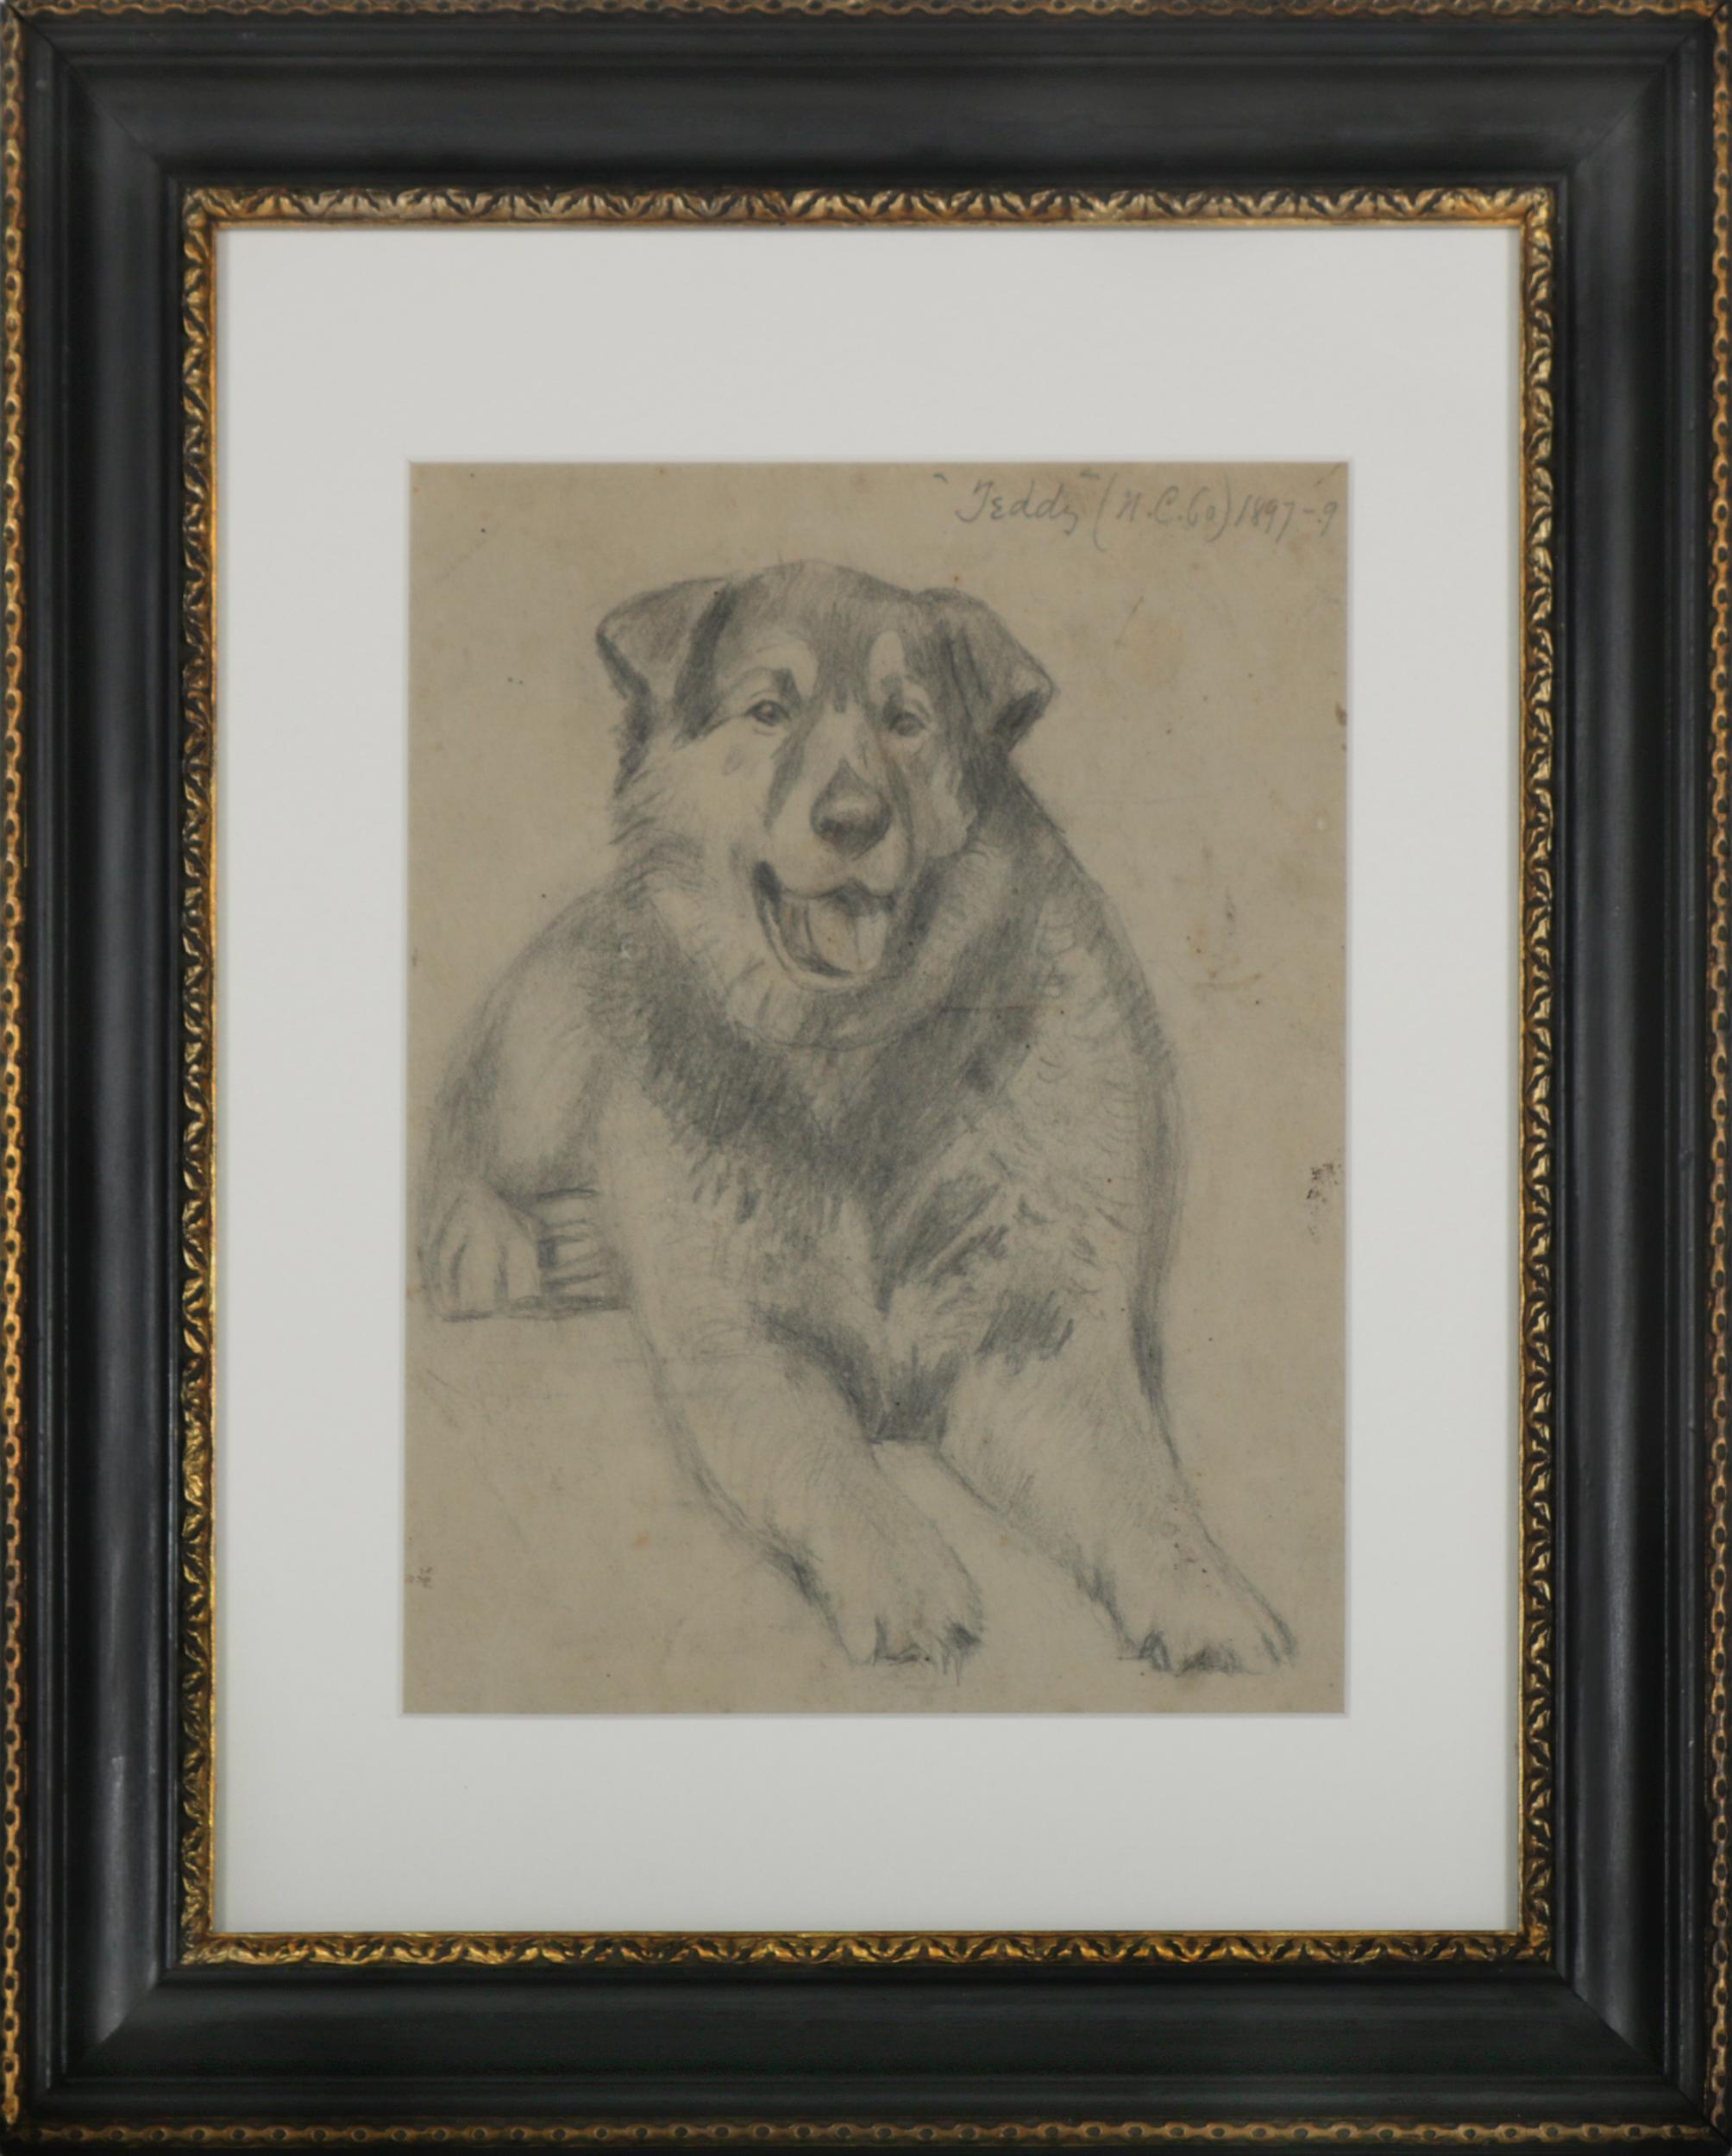 Unknown Animal Art - "Teddy" 1897-1899 Graphite Drawing of a Dog